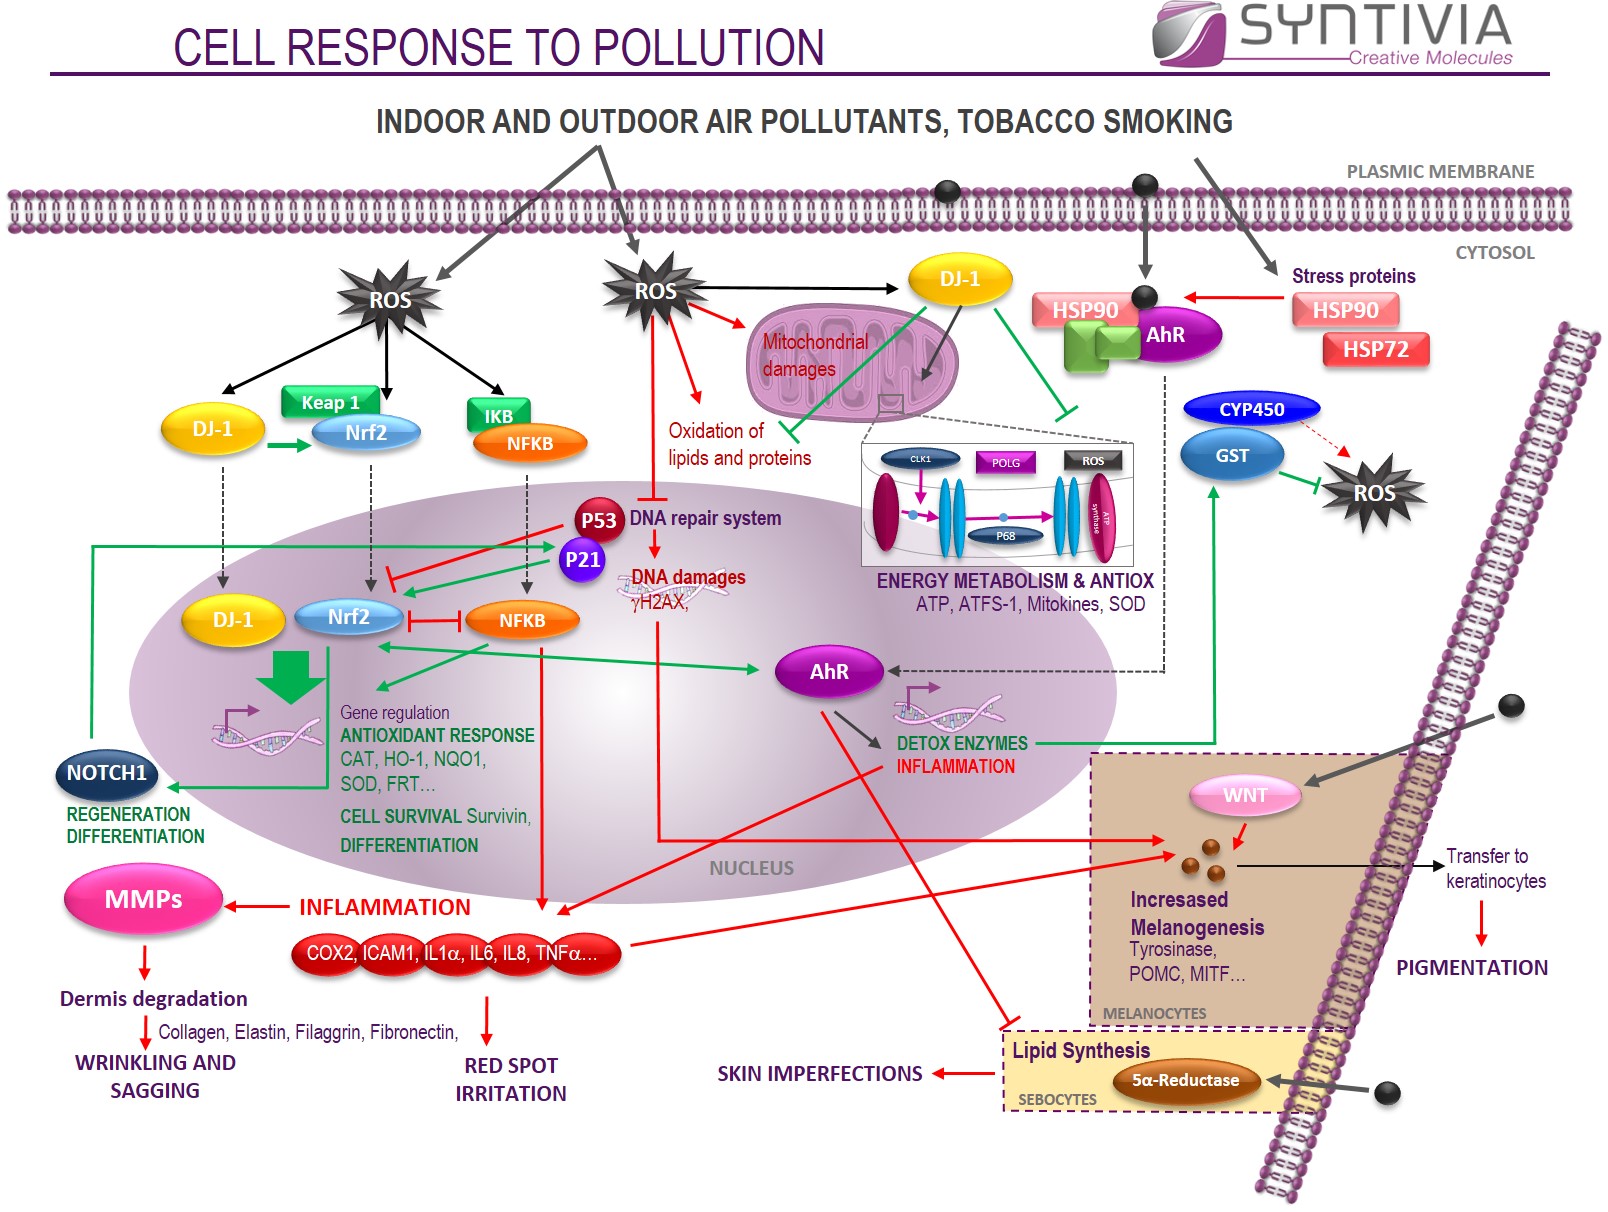 metabolic pathaways in cells against pollution